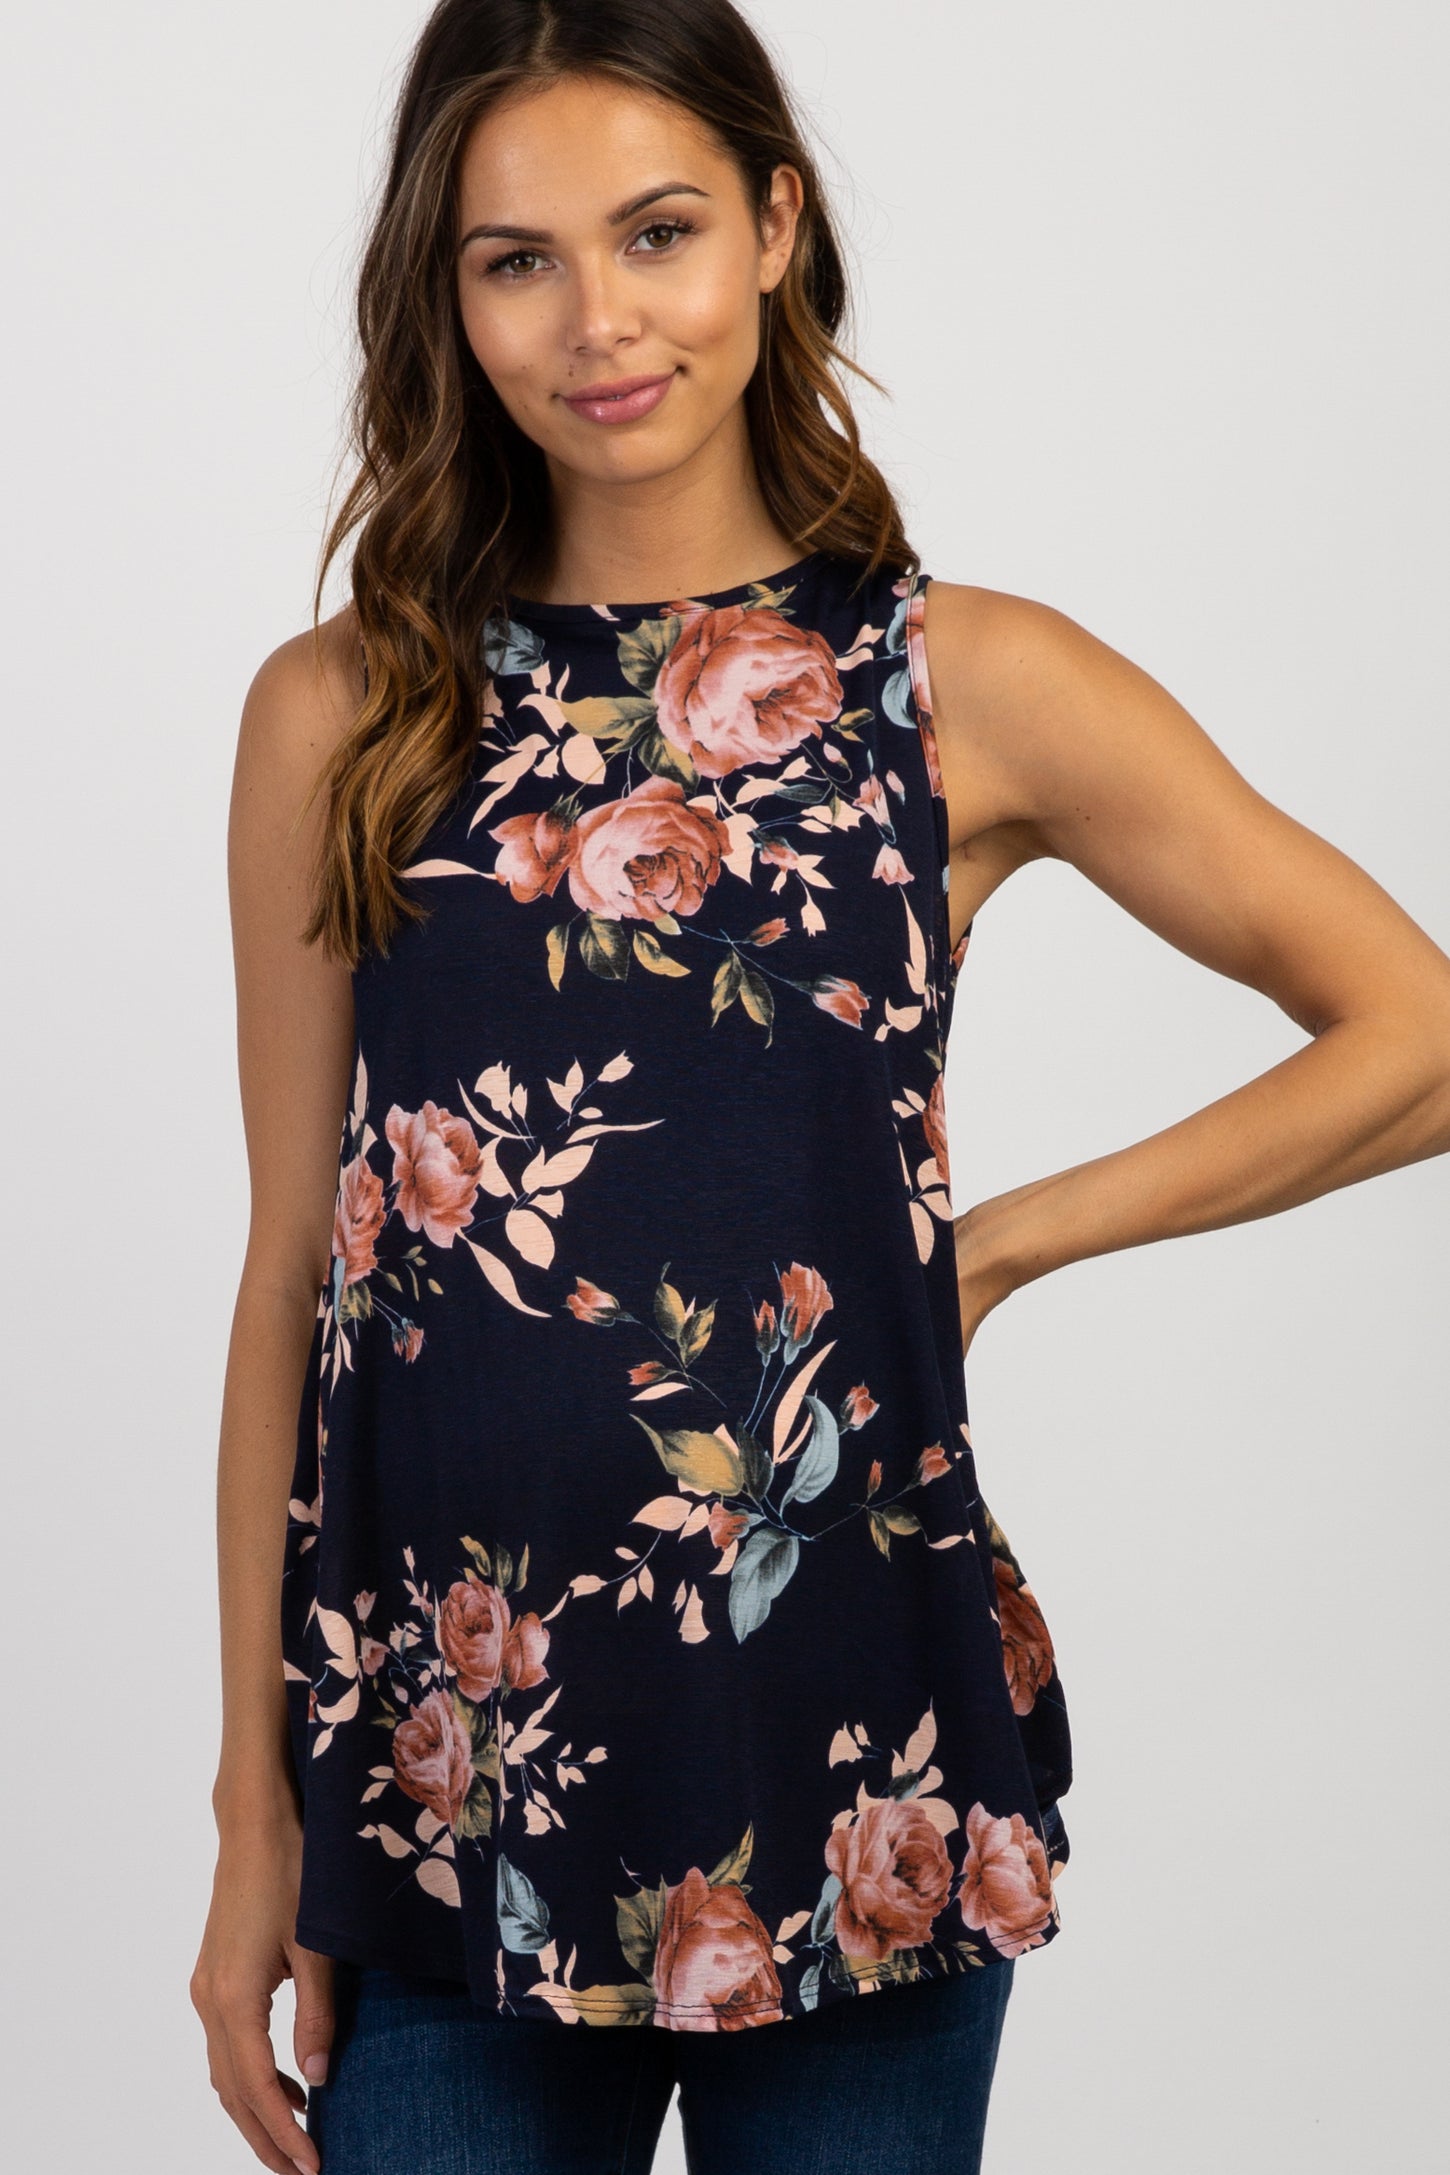 Navy Blue Floral Sleeveless Maternity Top